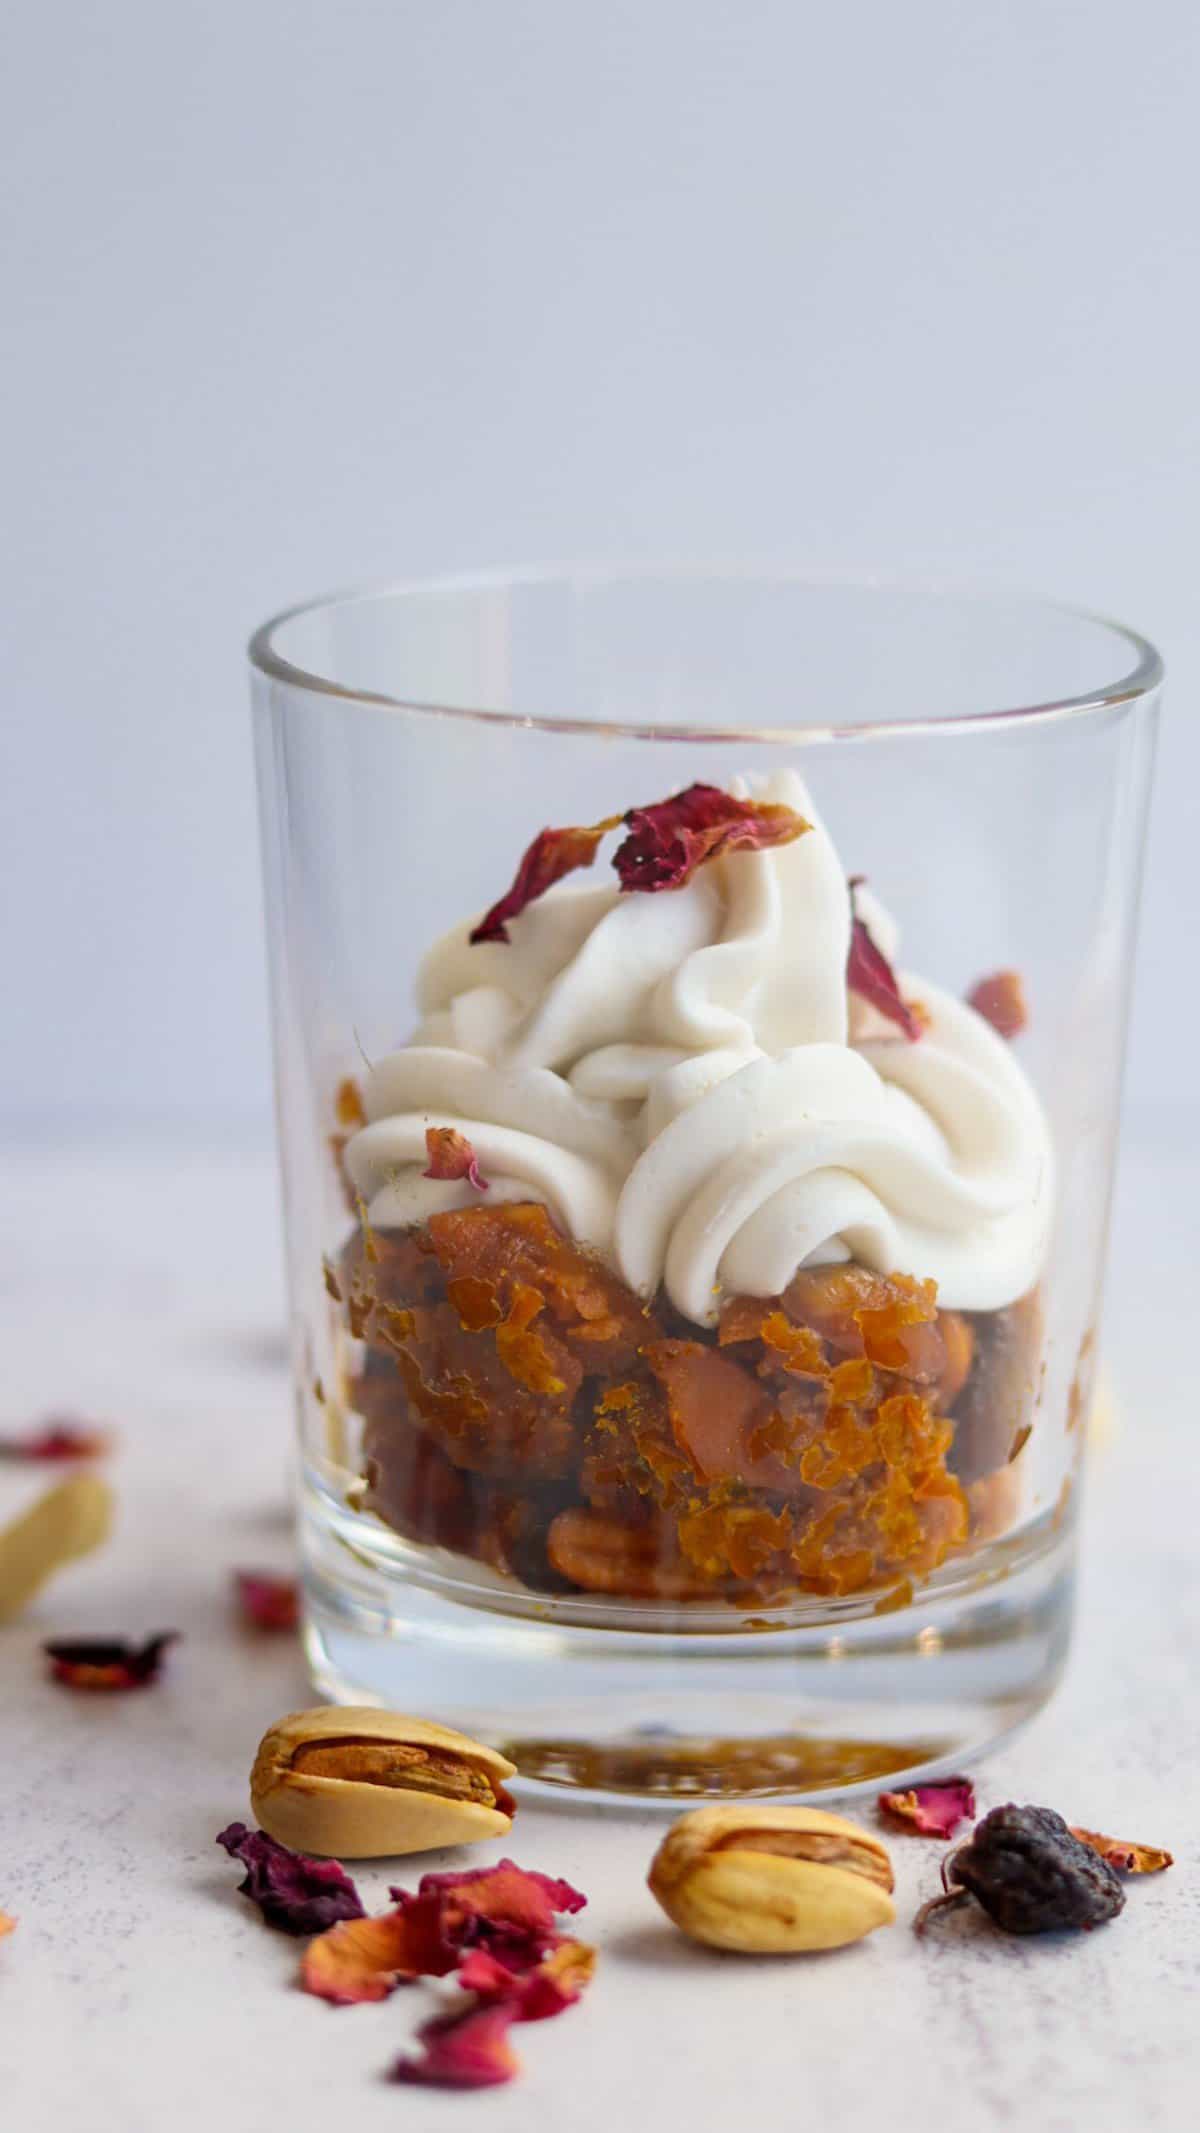 These highly indulgent vegan gajar halwa jars are a modern take on the classic Indian dessert gajar halwa or carrot halwa, topped with fresh coconut whipped cream and dry rose petals. 